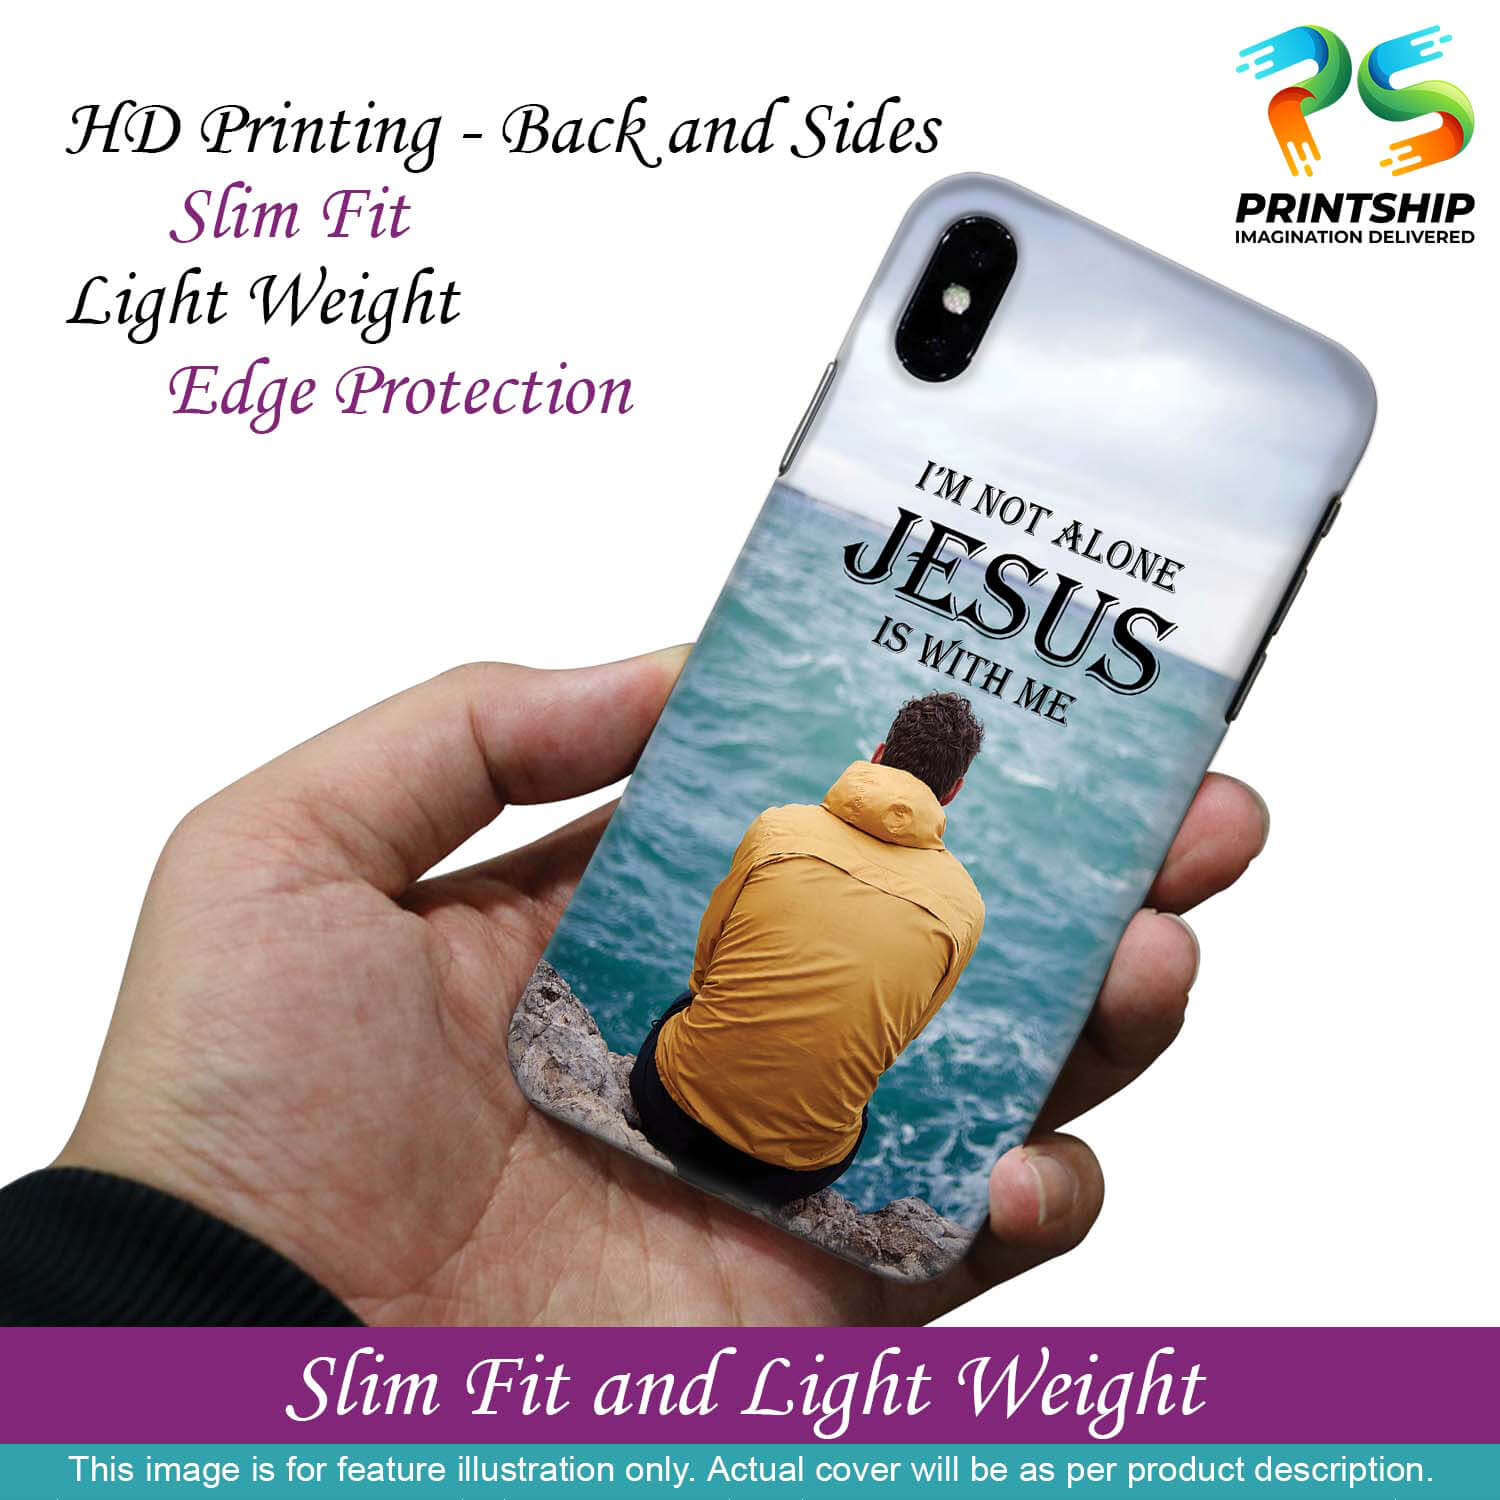 W0007-Jesus is with Me Back Cover for Realme Narzo 50i